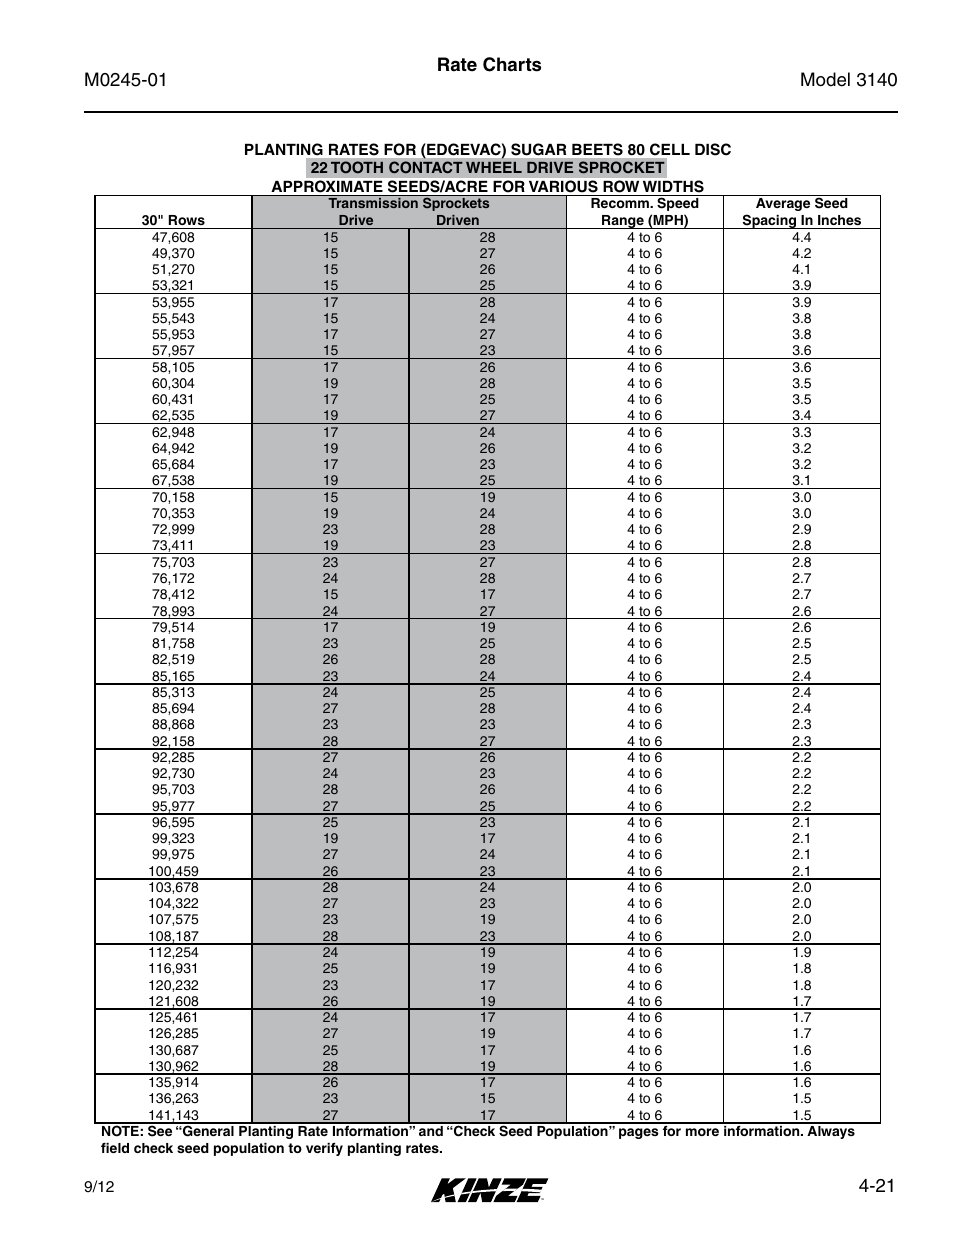 21 rate charts | Kinze 3140 Stack Fold Planter Rev. 7/14 User Manual | Page 77 / 150